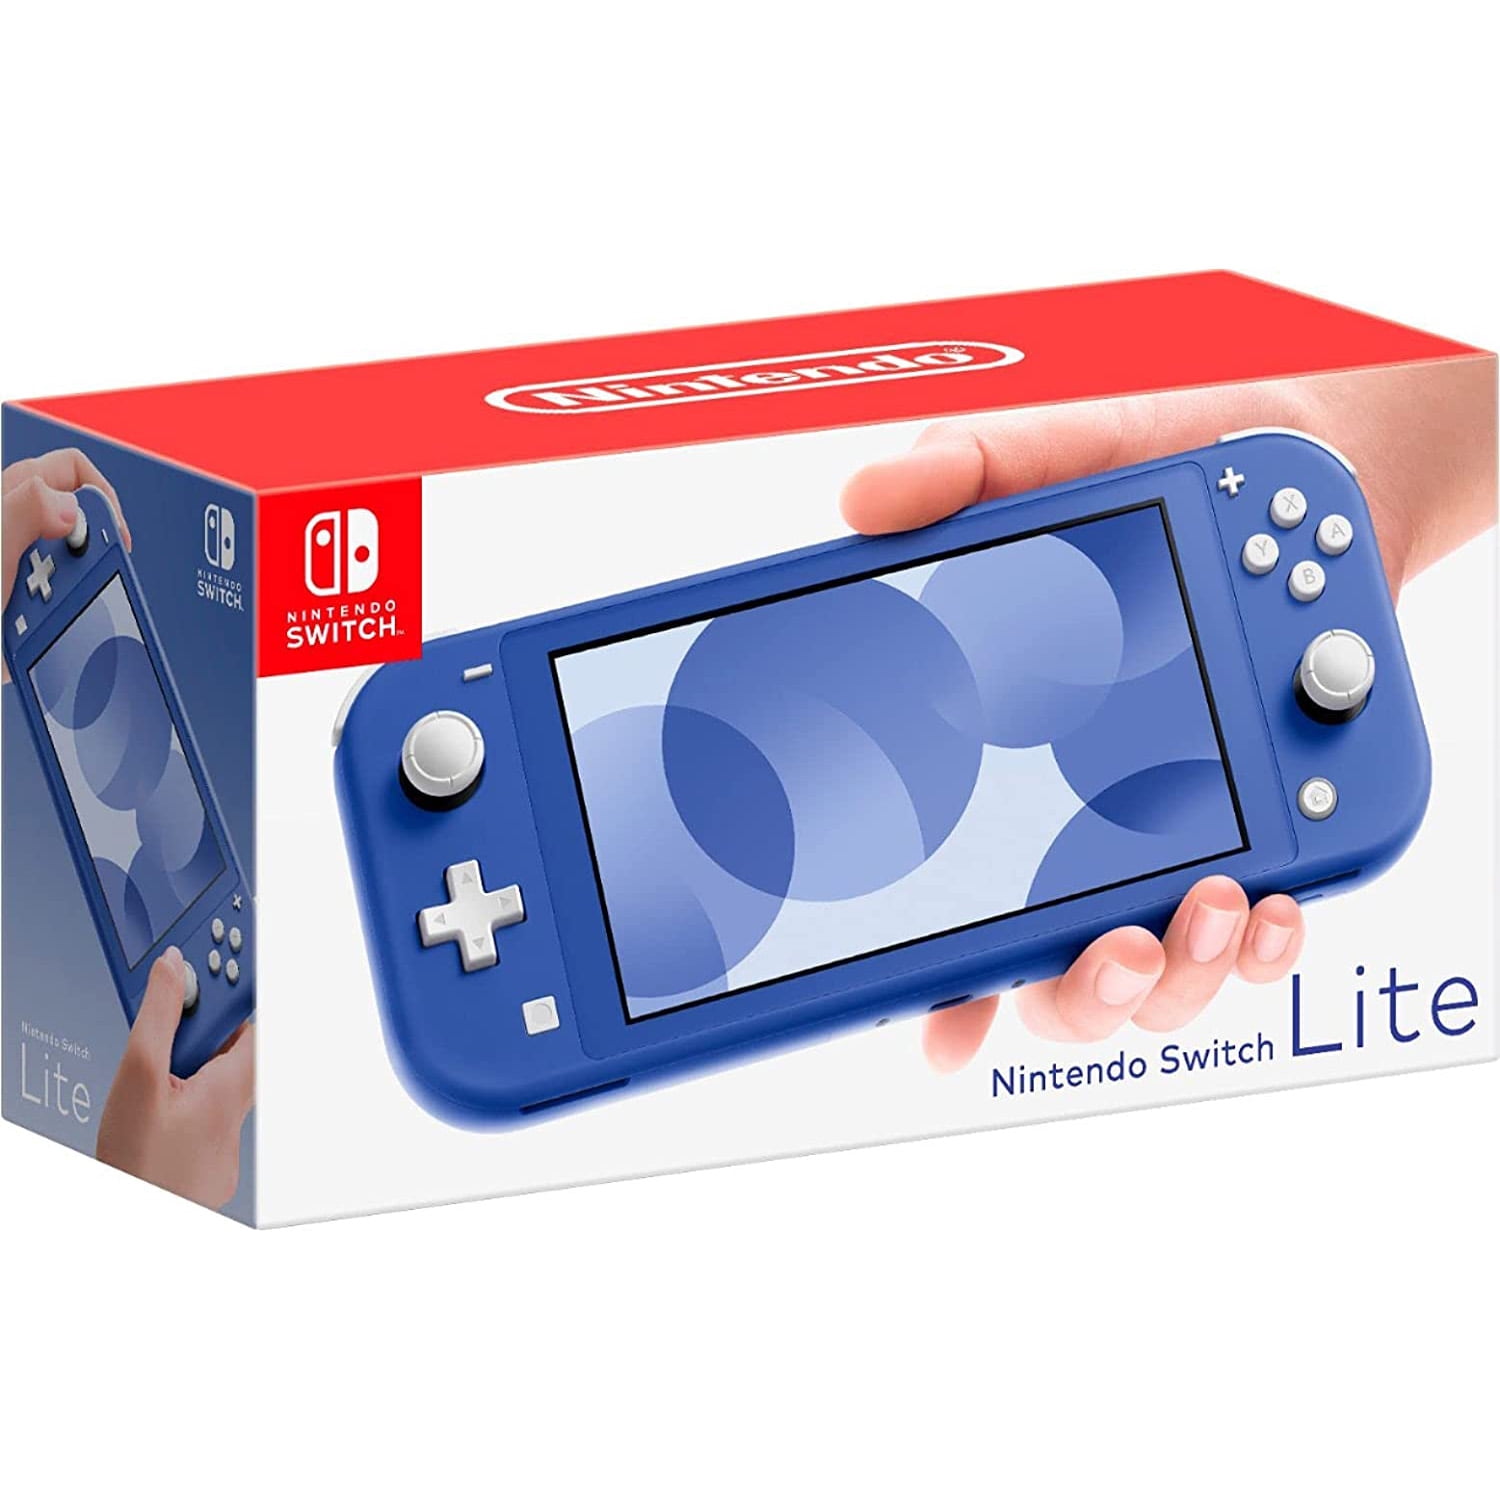 Nintendo Switch Lite (Coral) Bundle with Super Smash Bros and 6Ave 